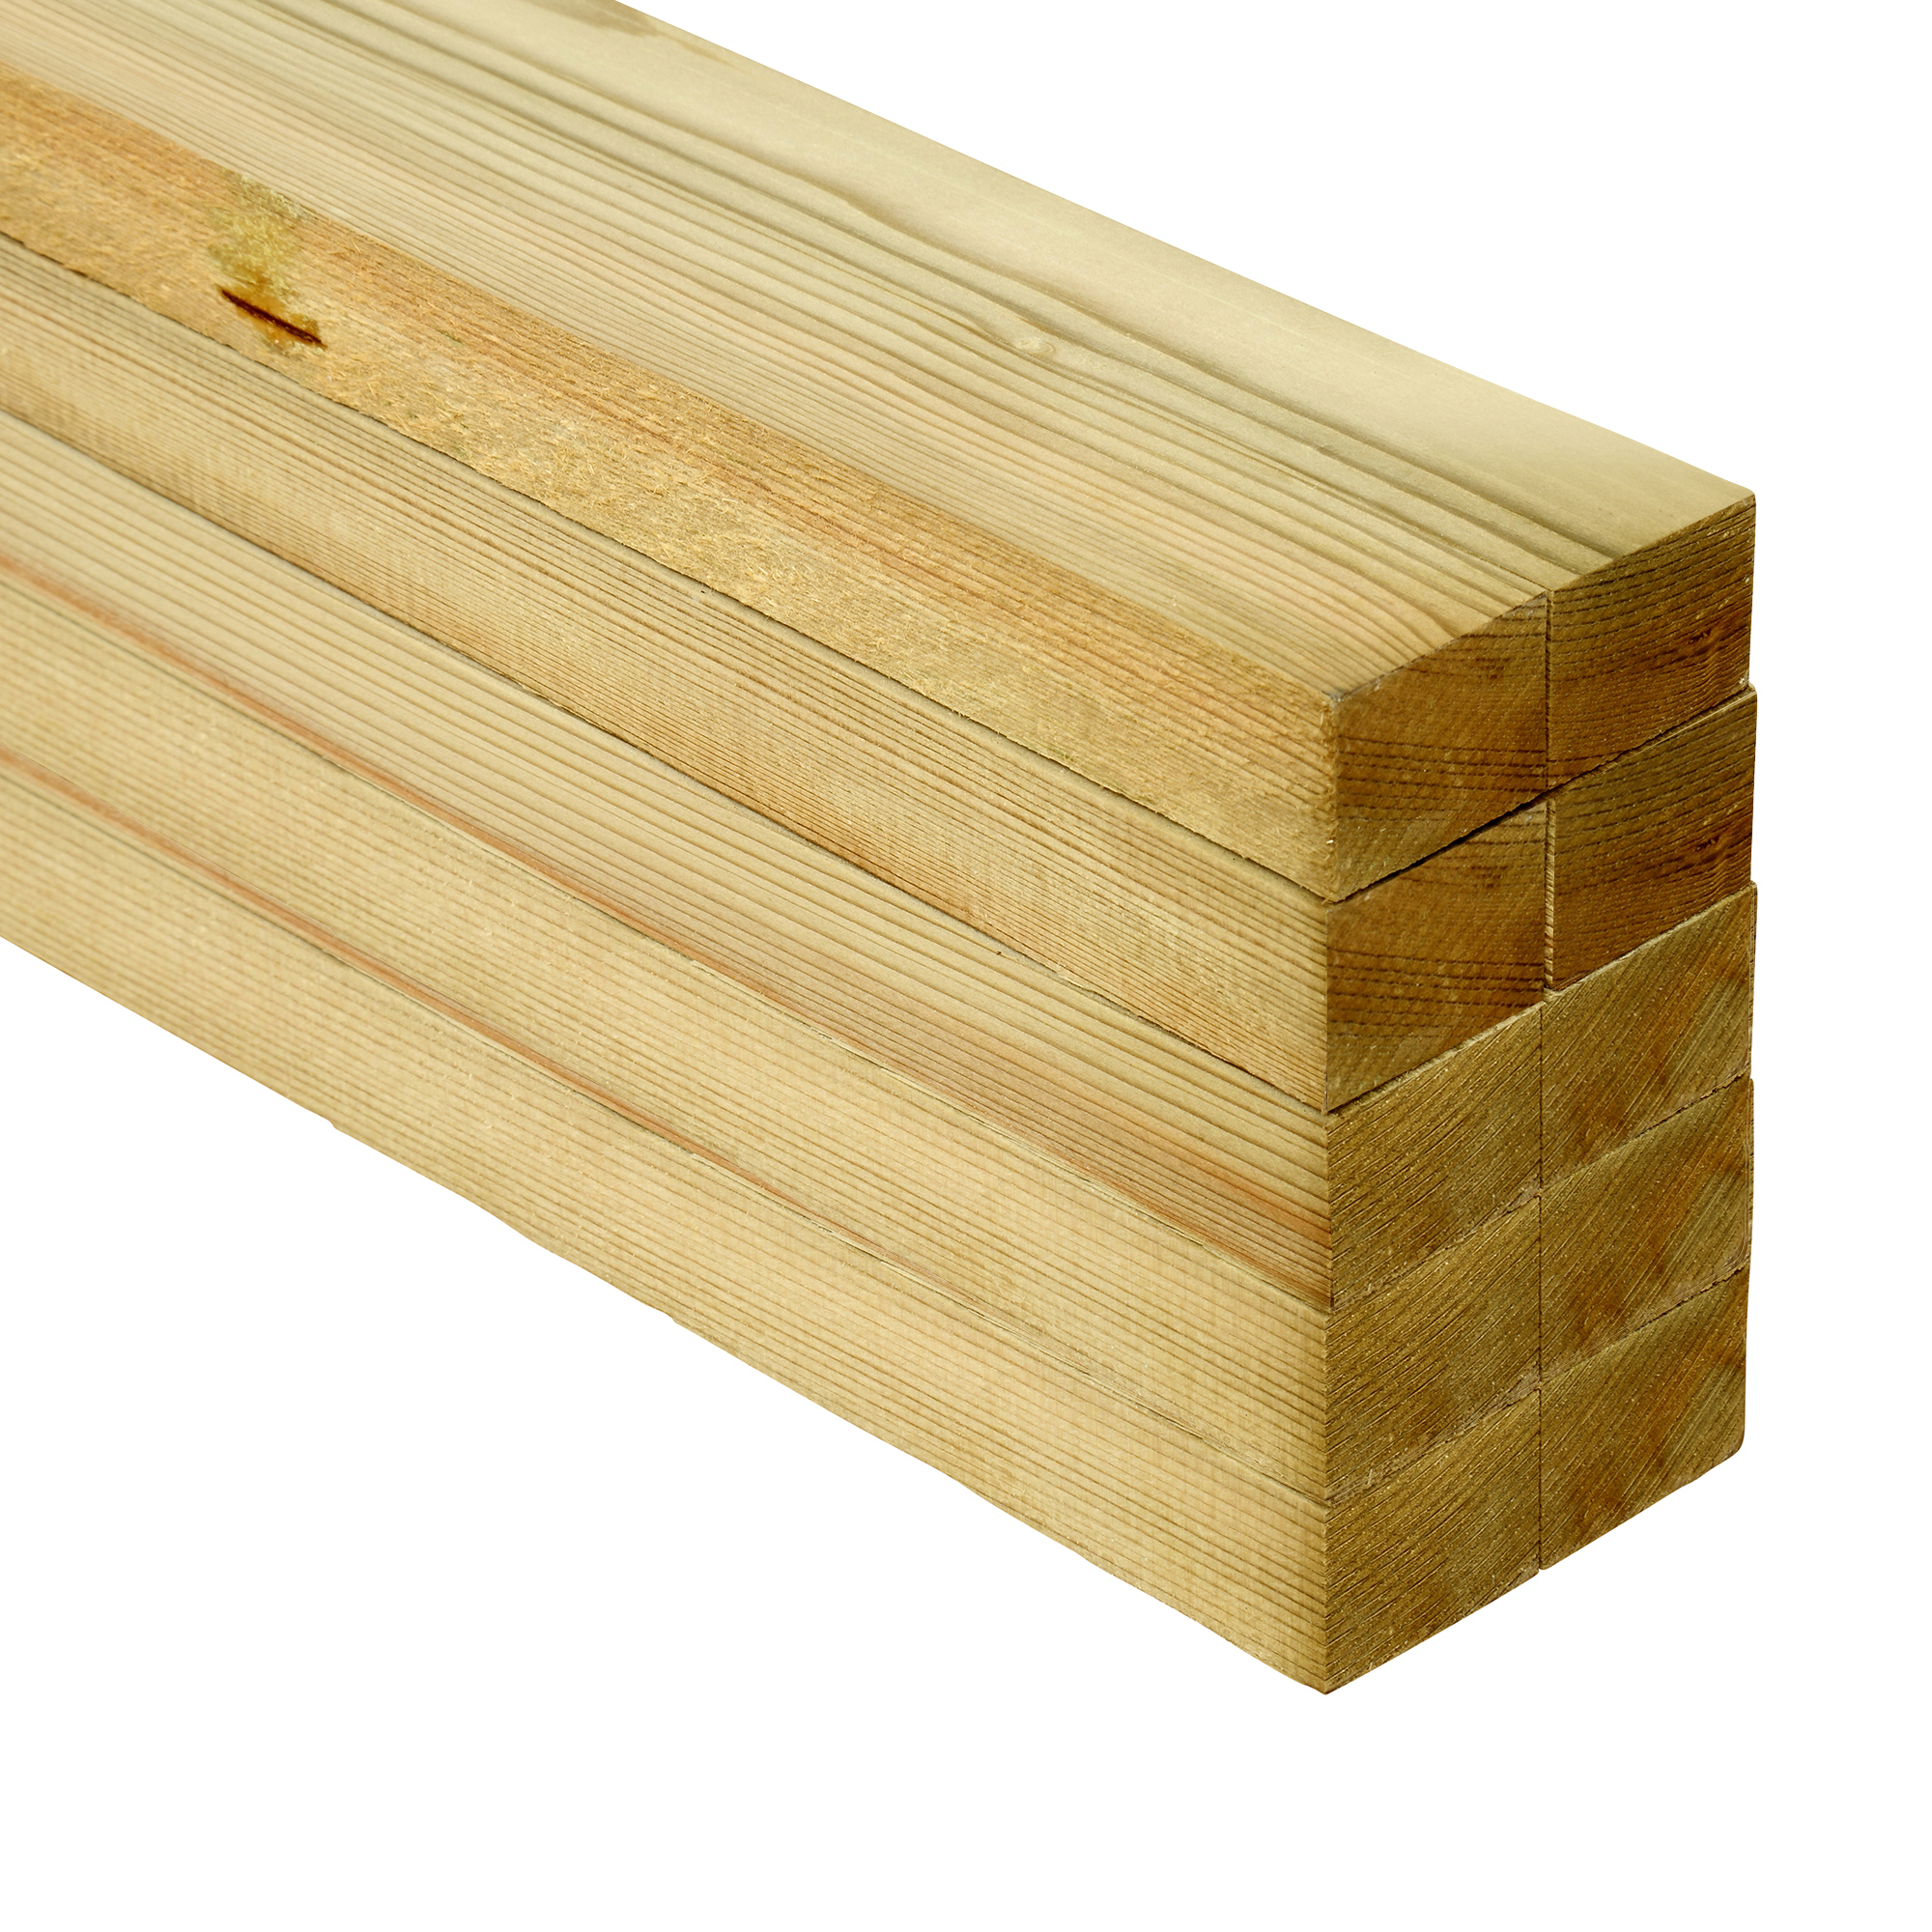 Image of Wickes Treated Sawn Timber - 25 x 38 x 2400mm - Pack of 10